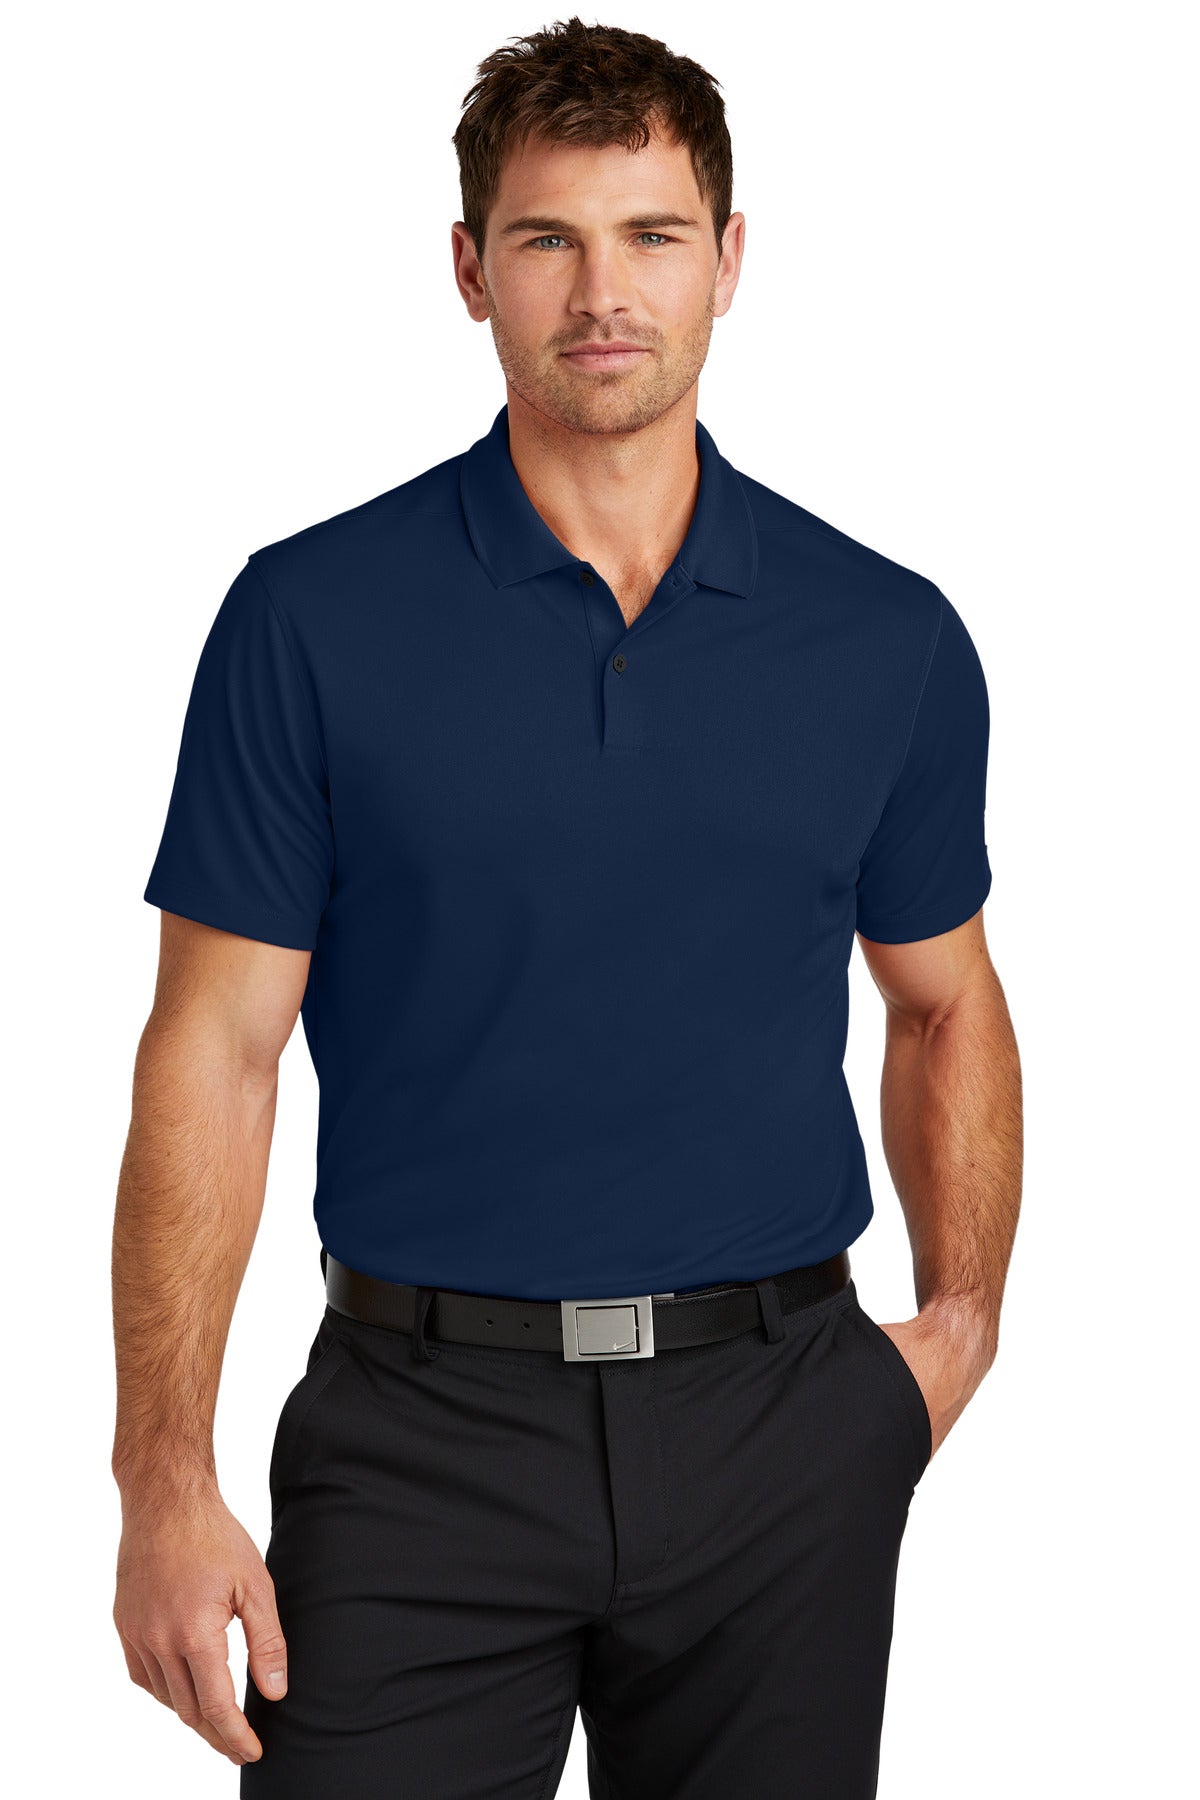 Nike Polo Navy, Shop The Largest Collection